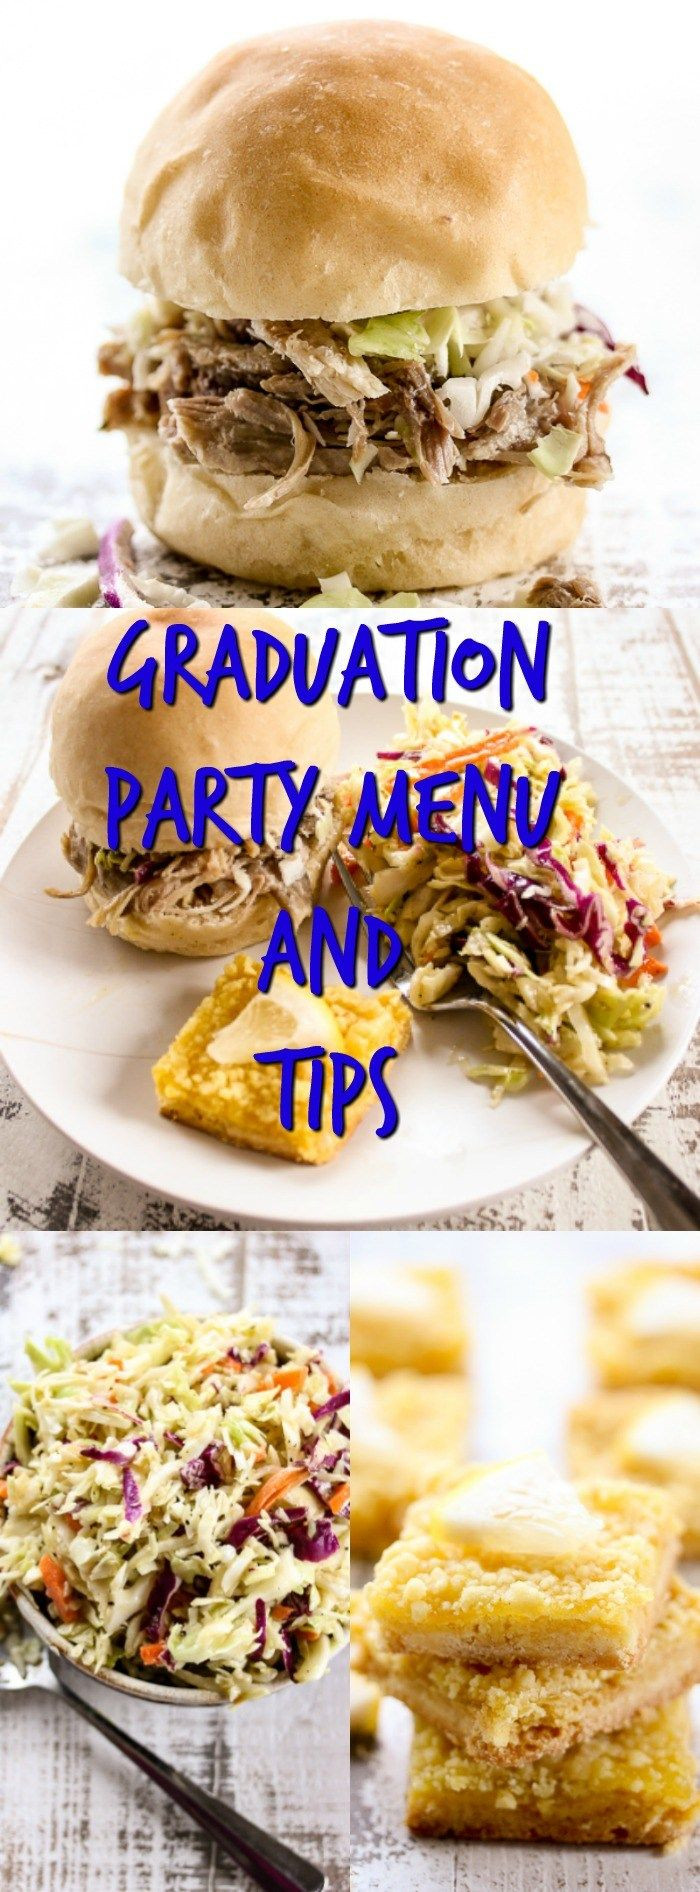 Inexpensive Graduation Party Food Ideas
 Graduation Party Menu and Tips